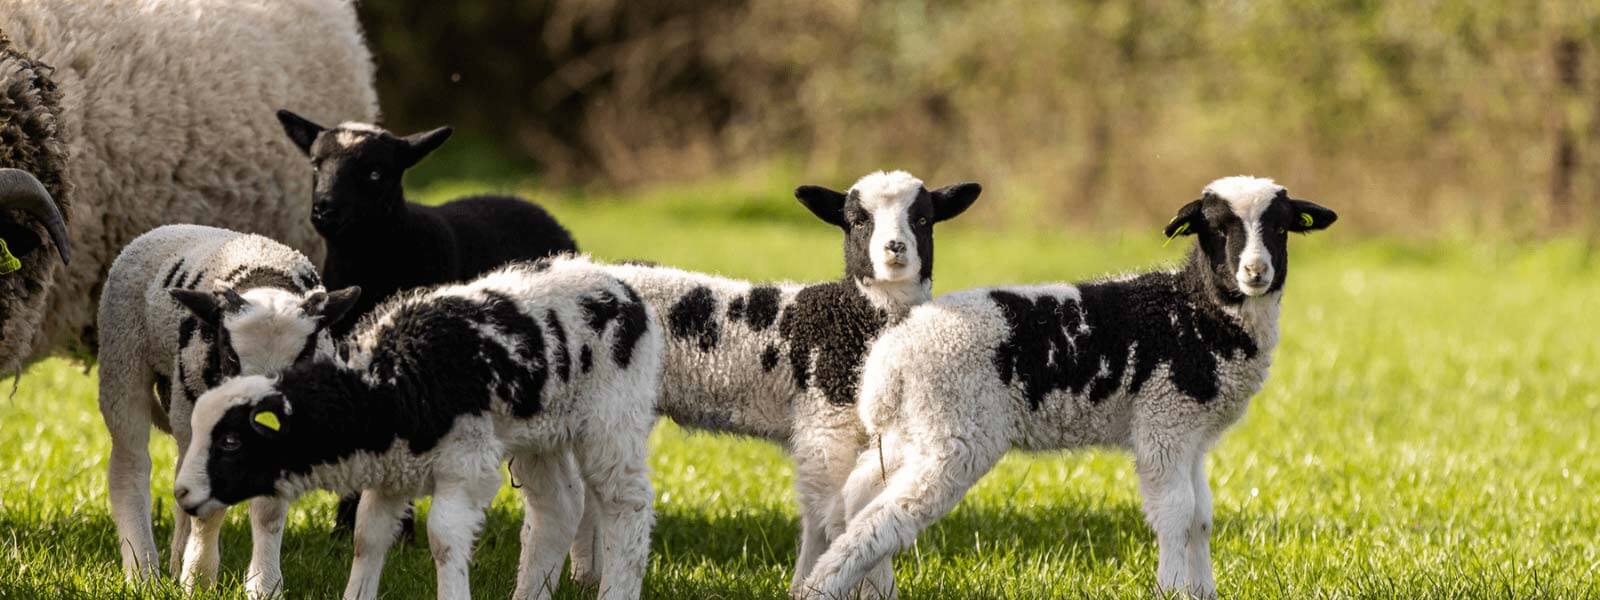 https://www.airfield.ie/wp-content/uploads/2021/05/Jacob-Lambs-at-Airfield-Estate-1-1.jpg